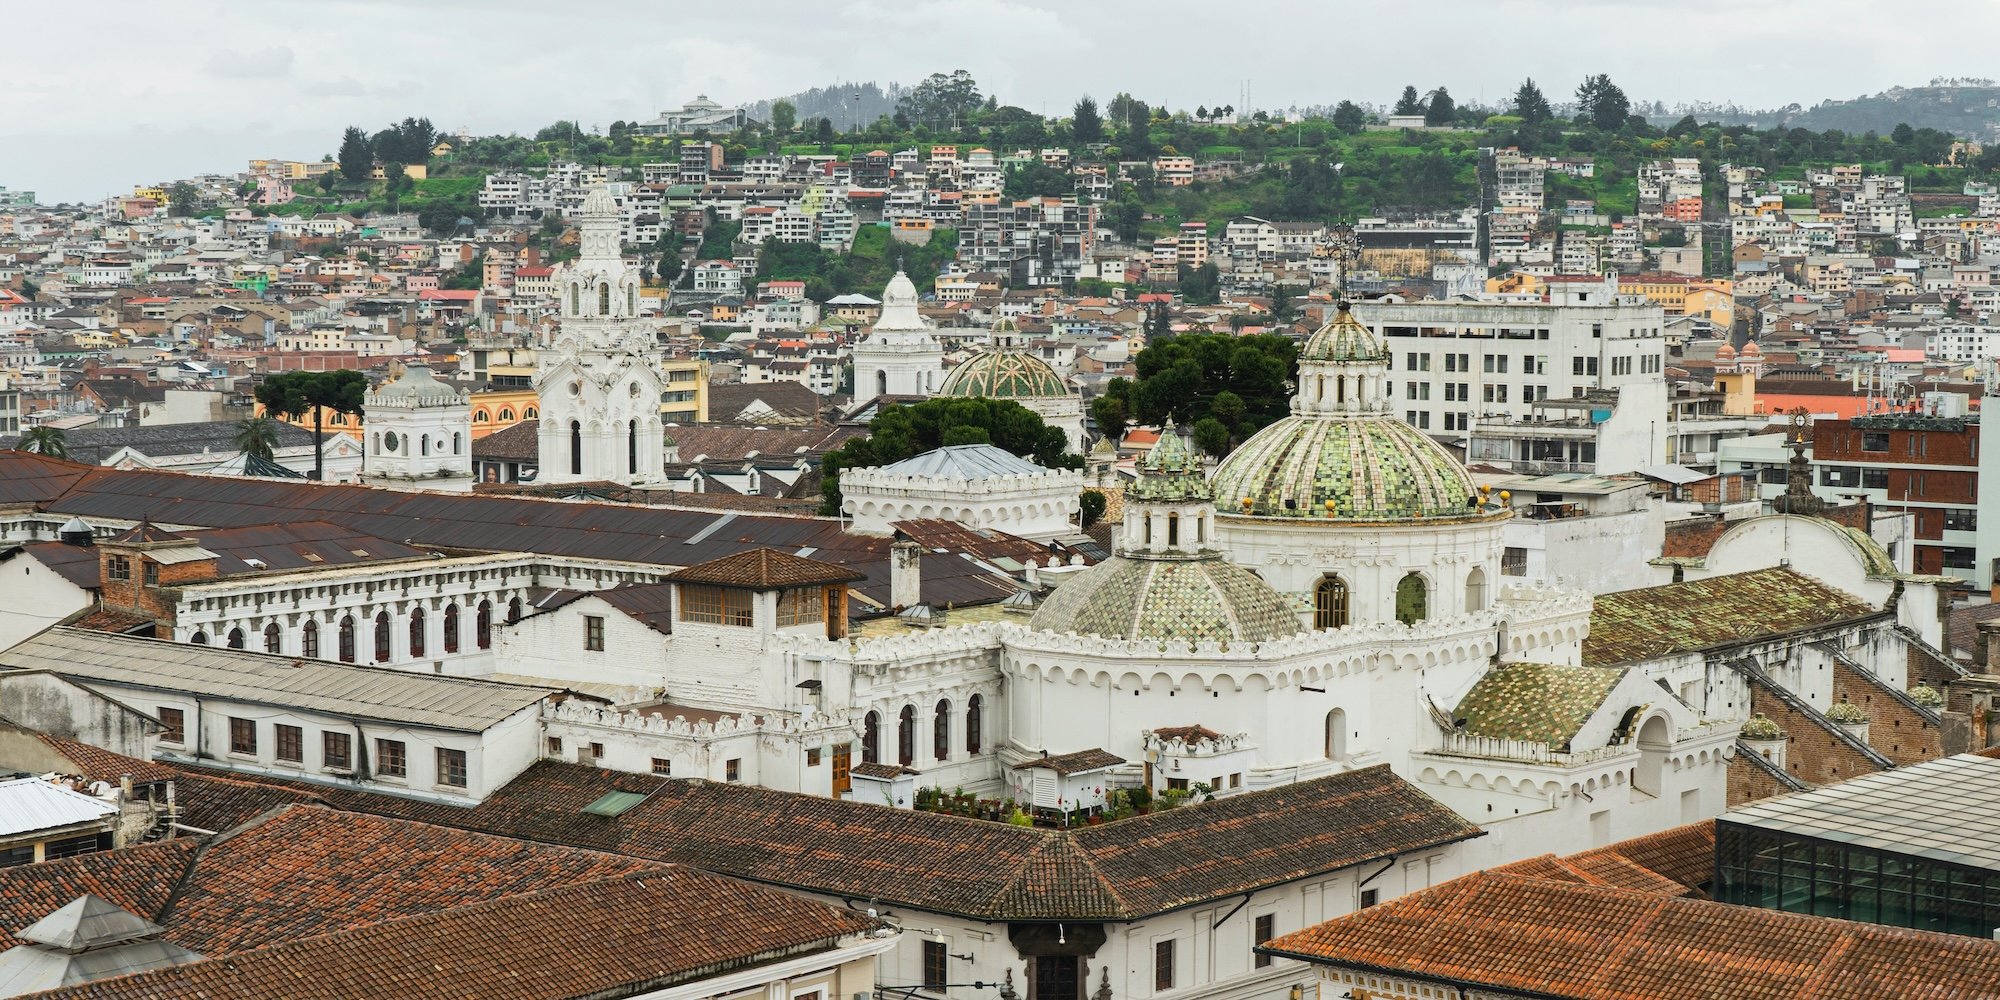 A skyline view of rooftops in Quito, Ecuador.